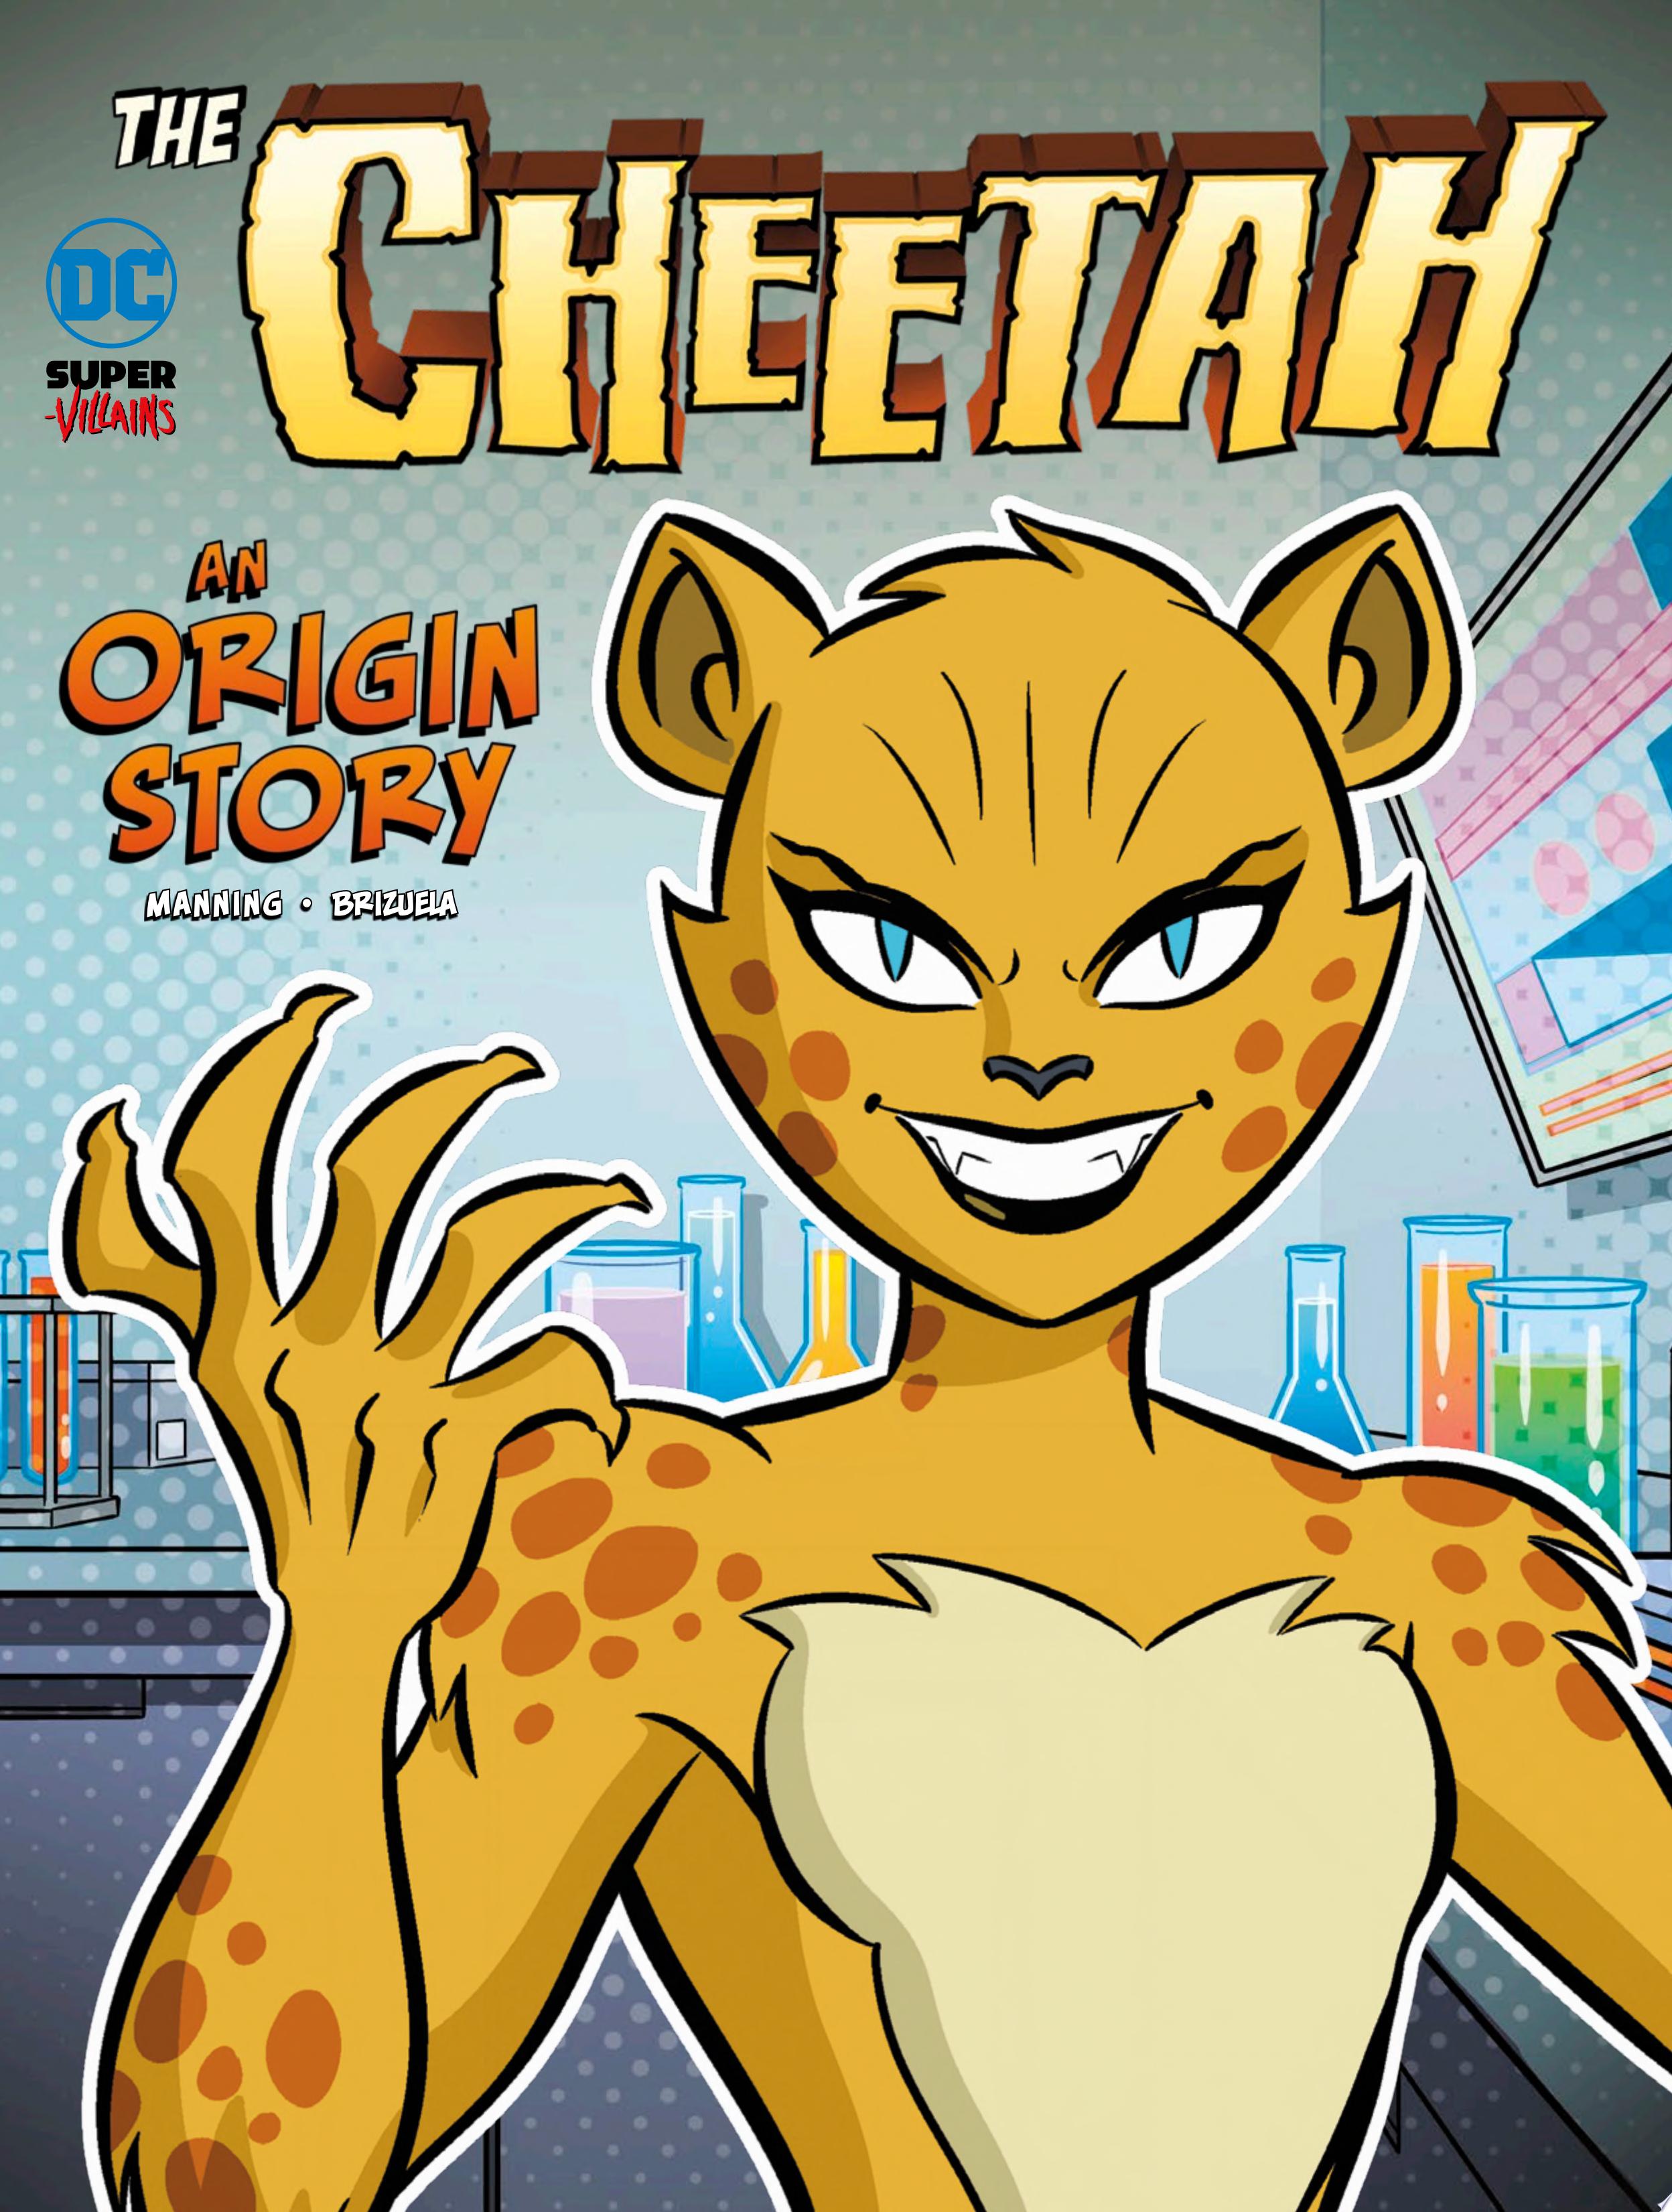 Image for "The Cheetah"